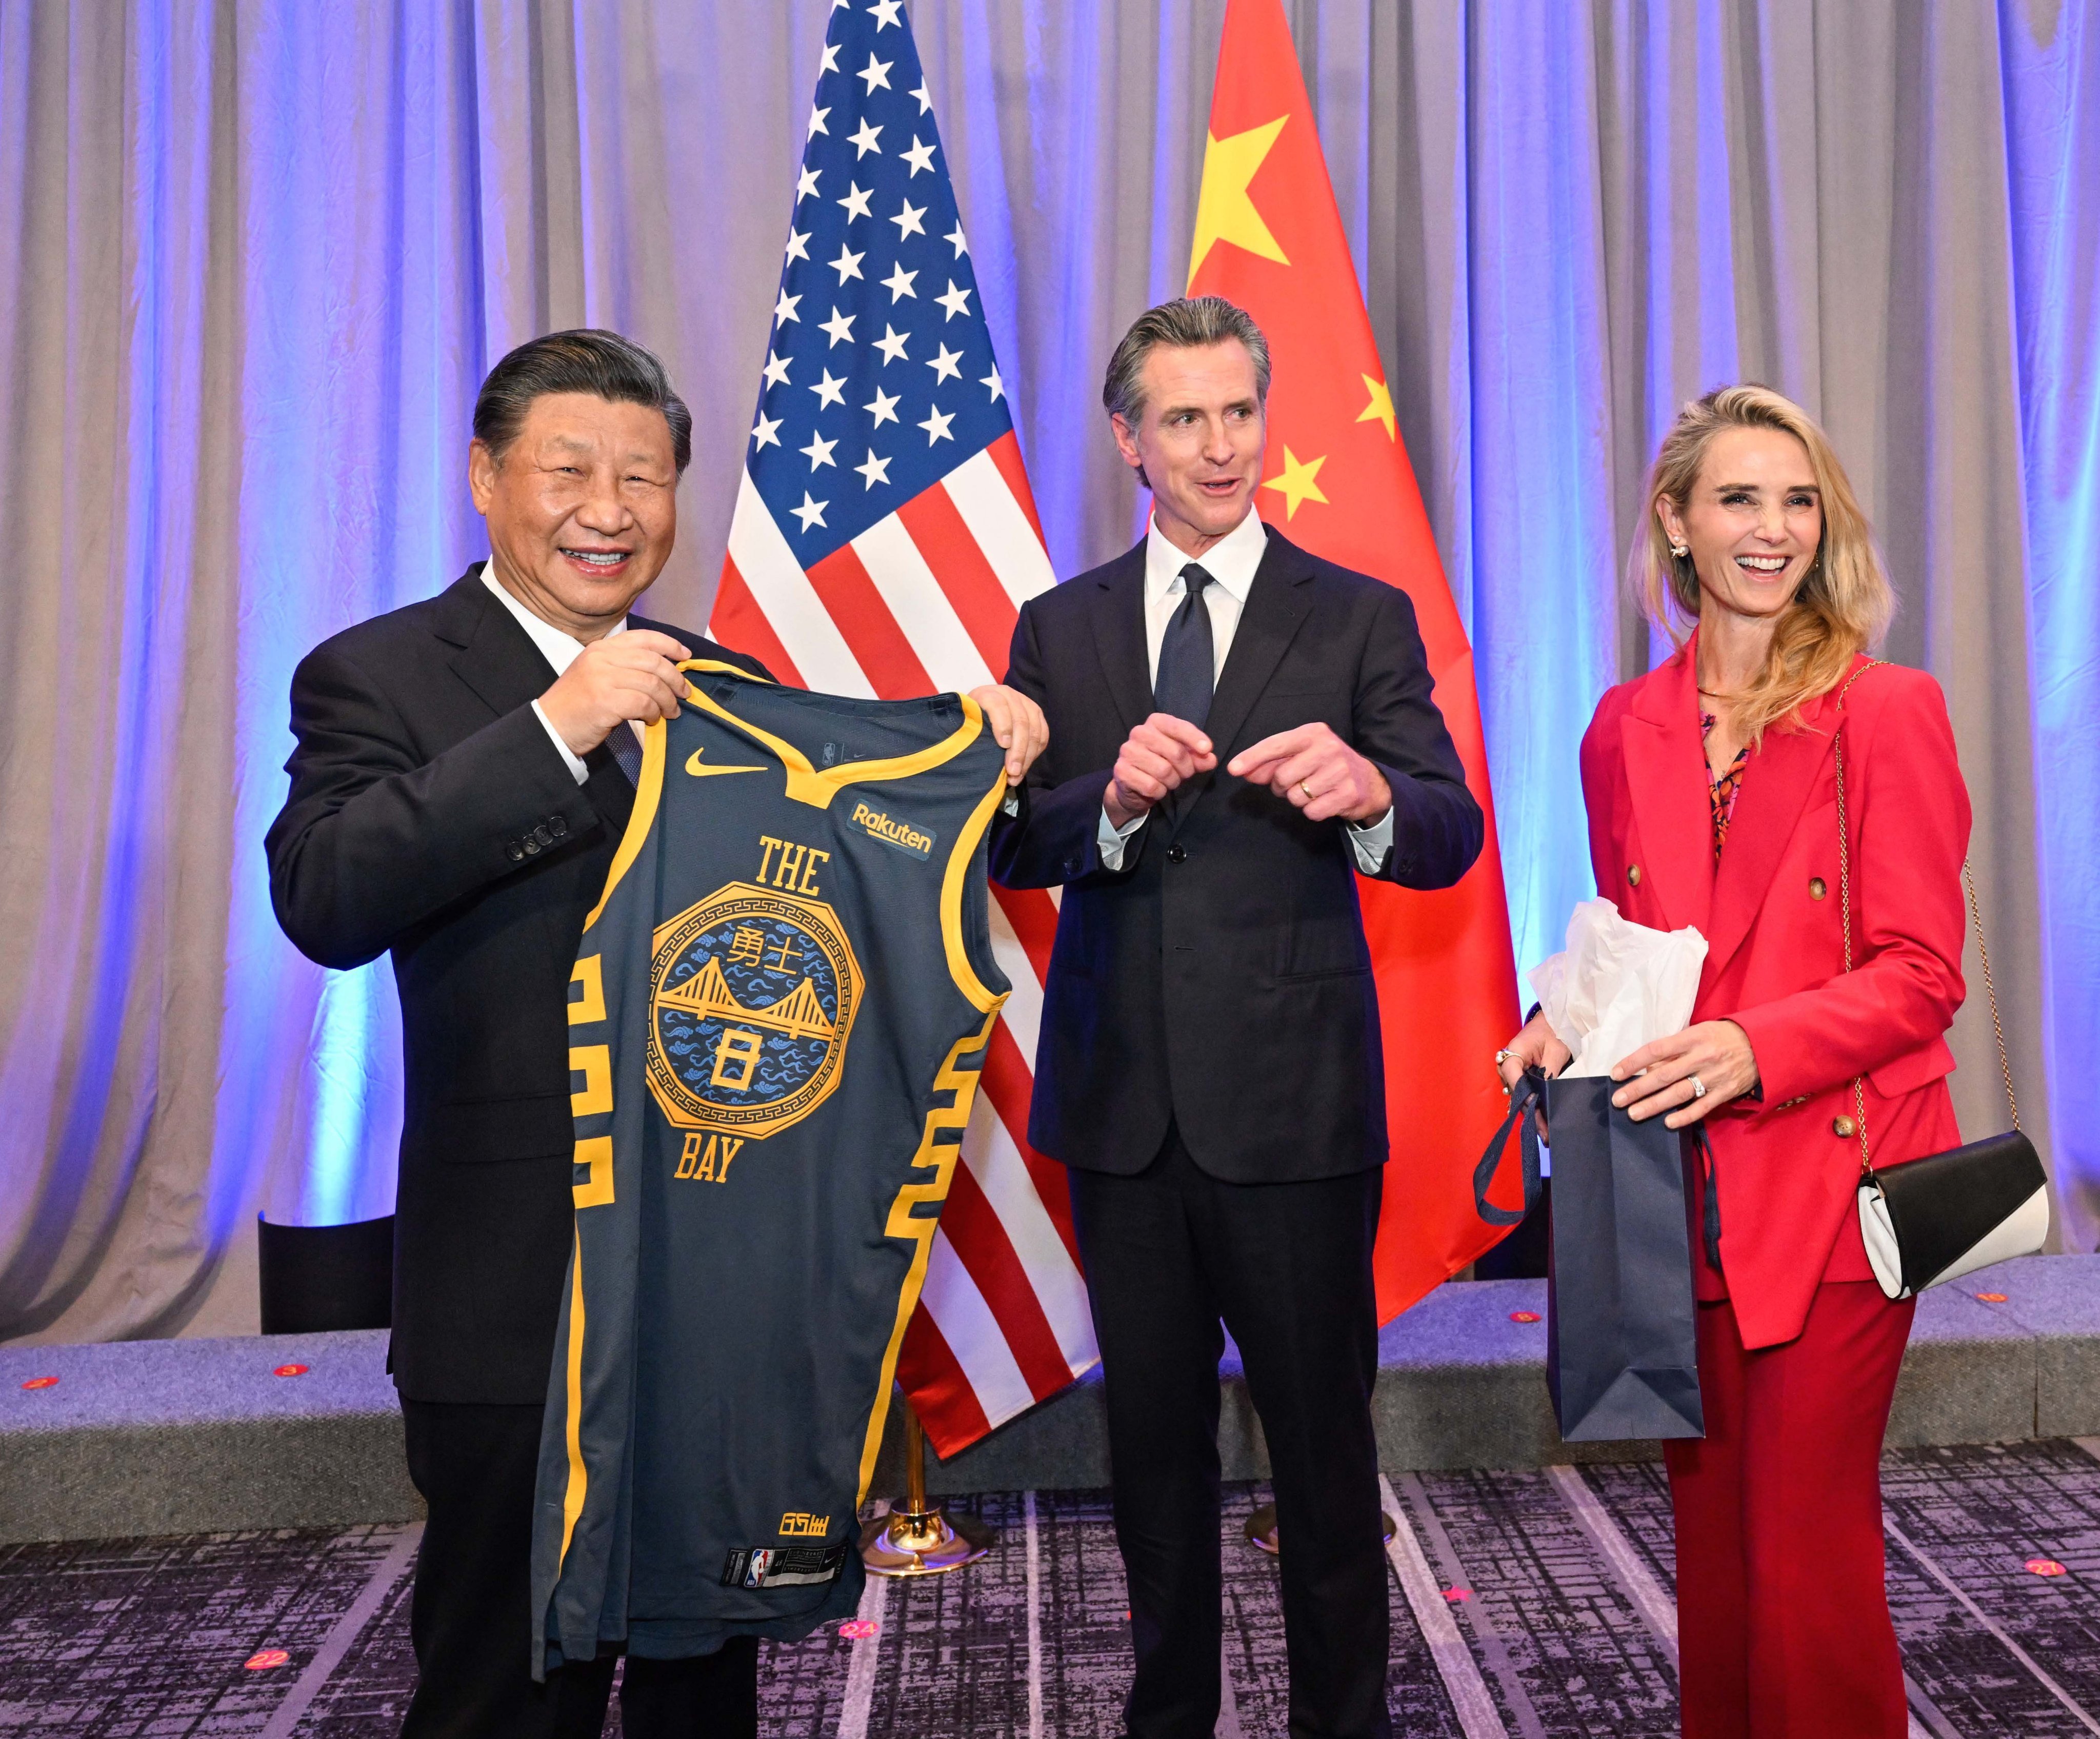 President Xi Jinping with a Golden State Warriors basketball jersey gifted to him by California governor Gavin Newsom, ahead of a welcome dinner in San Francisco in November. Photo: X/SpokespersonCHN